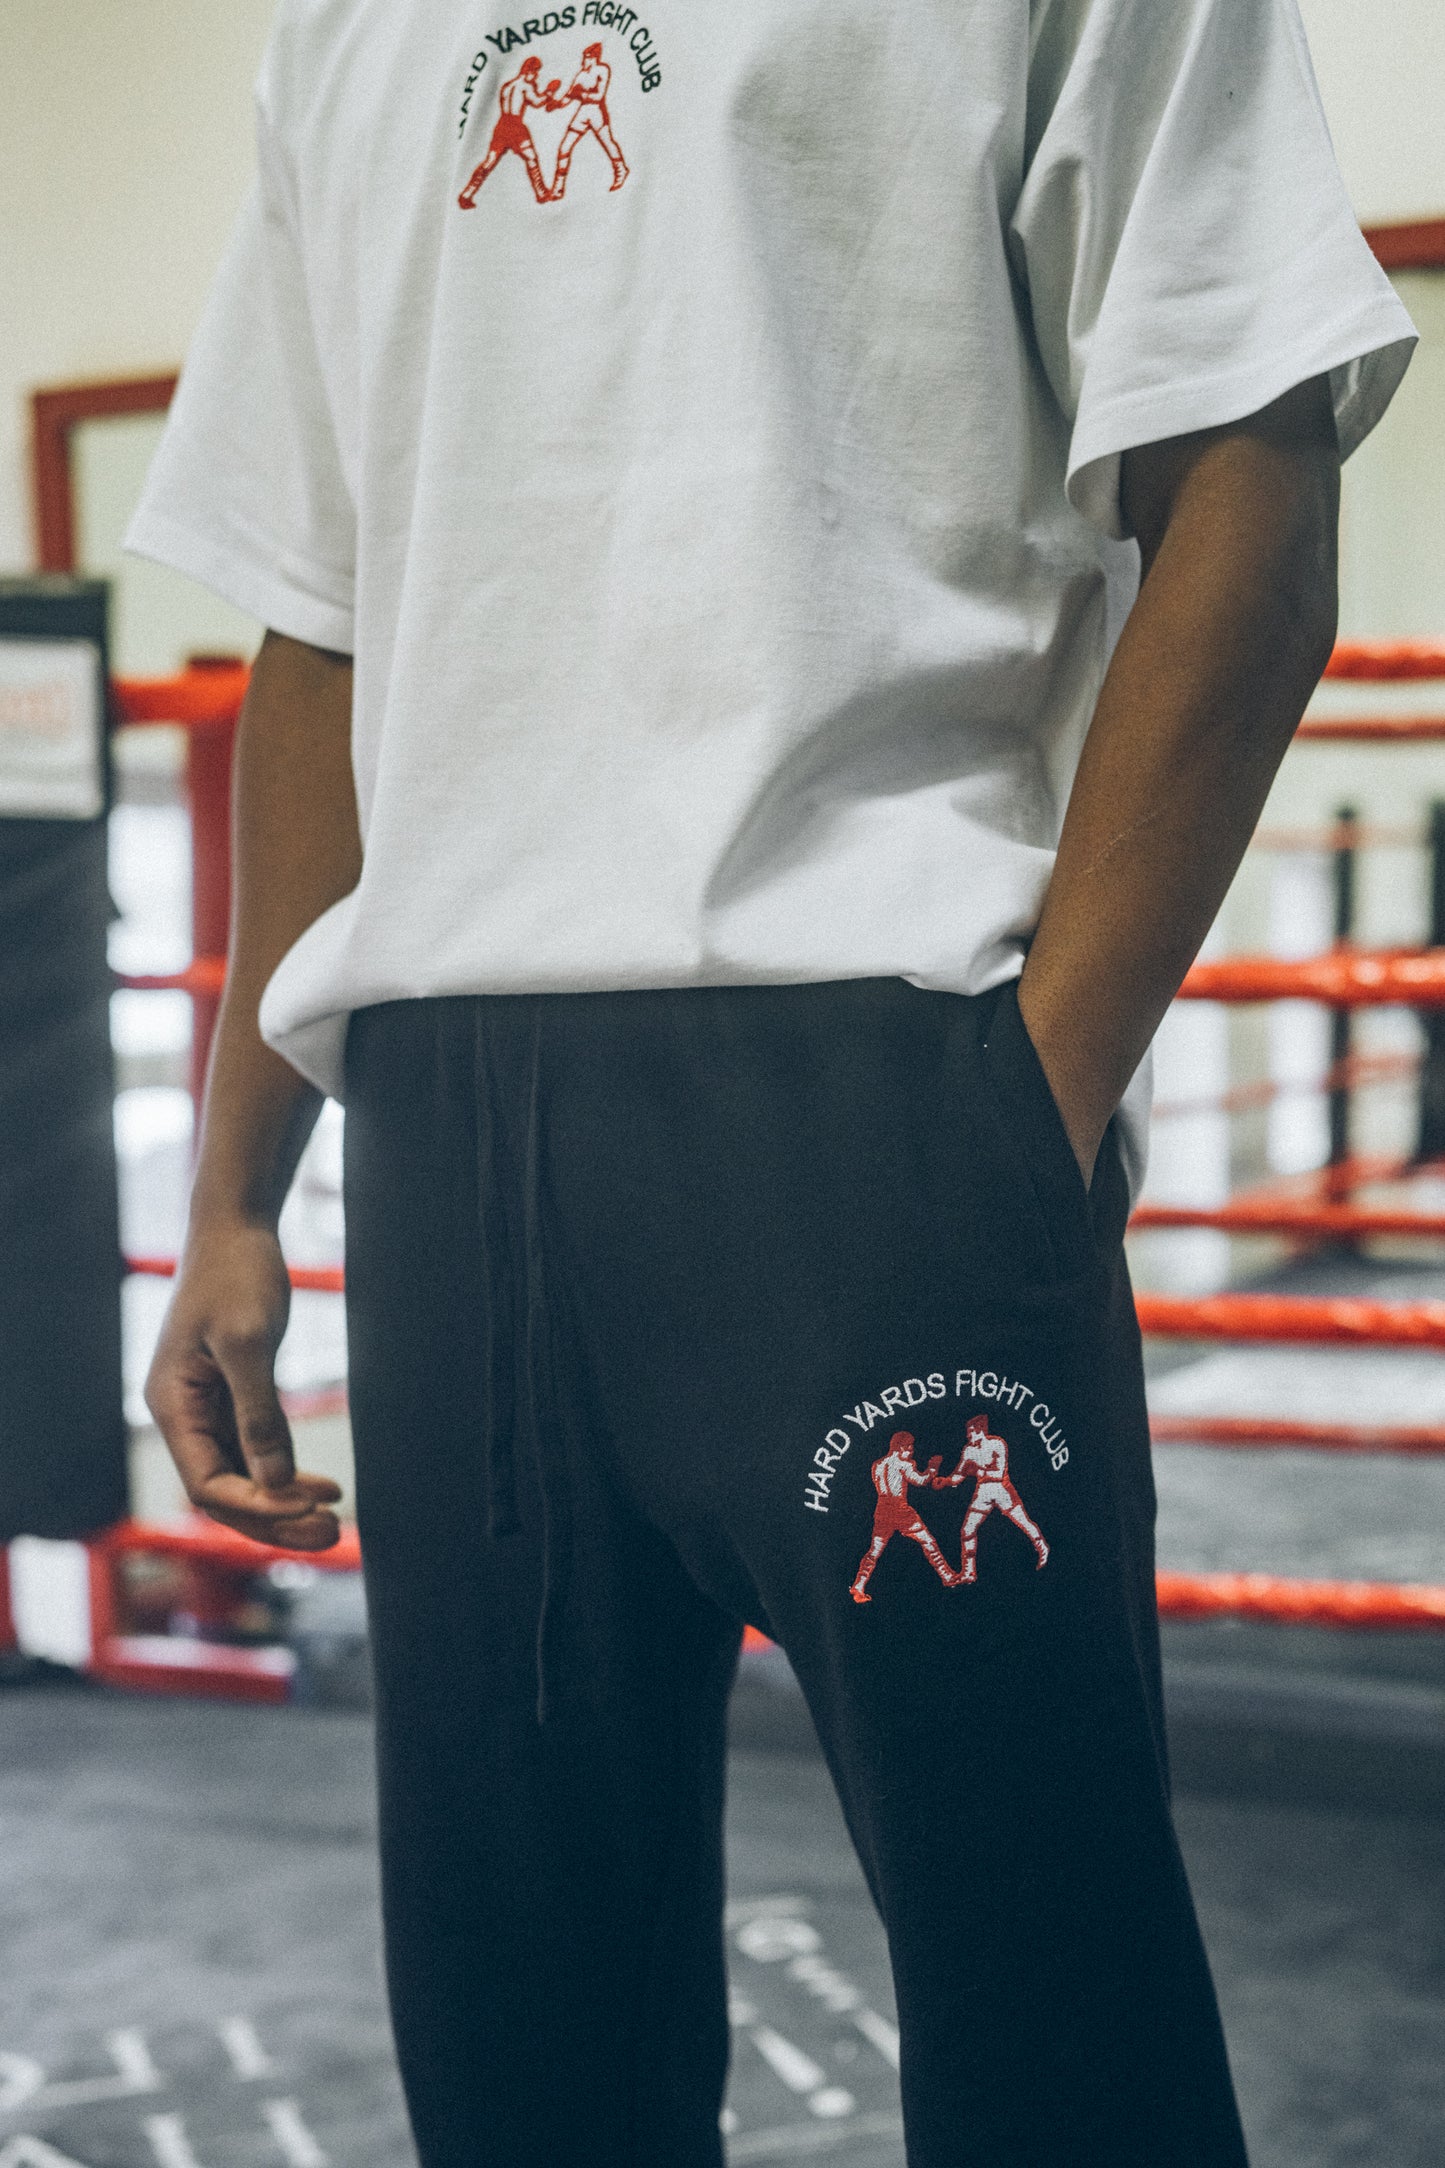 Vice 84 'Hard Yards Fight Club' Embroidered Joggers - Black